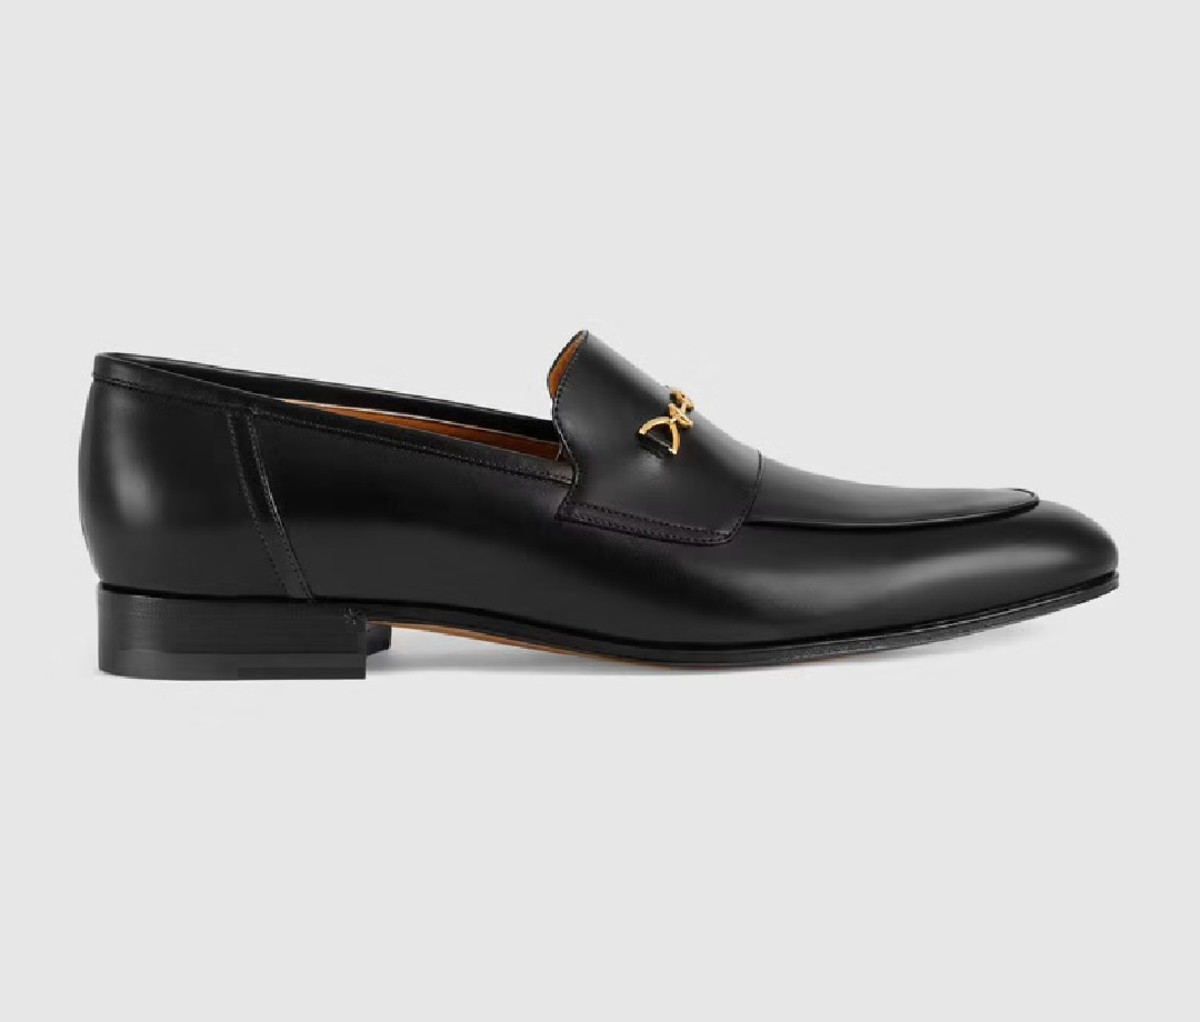 GUCCI Men's Loafer with Horsebit